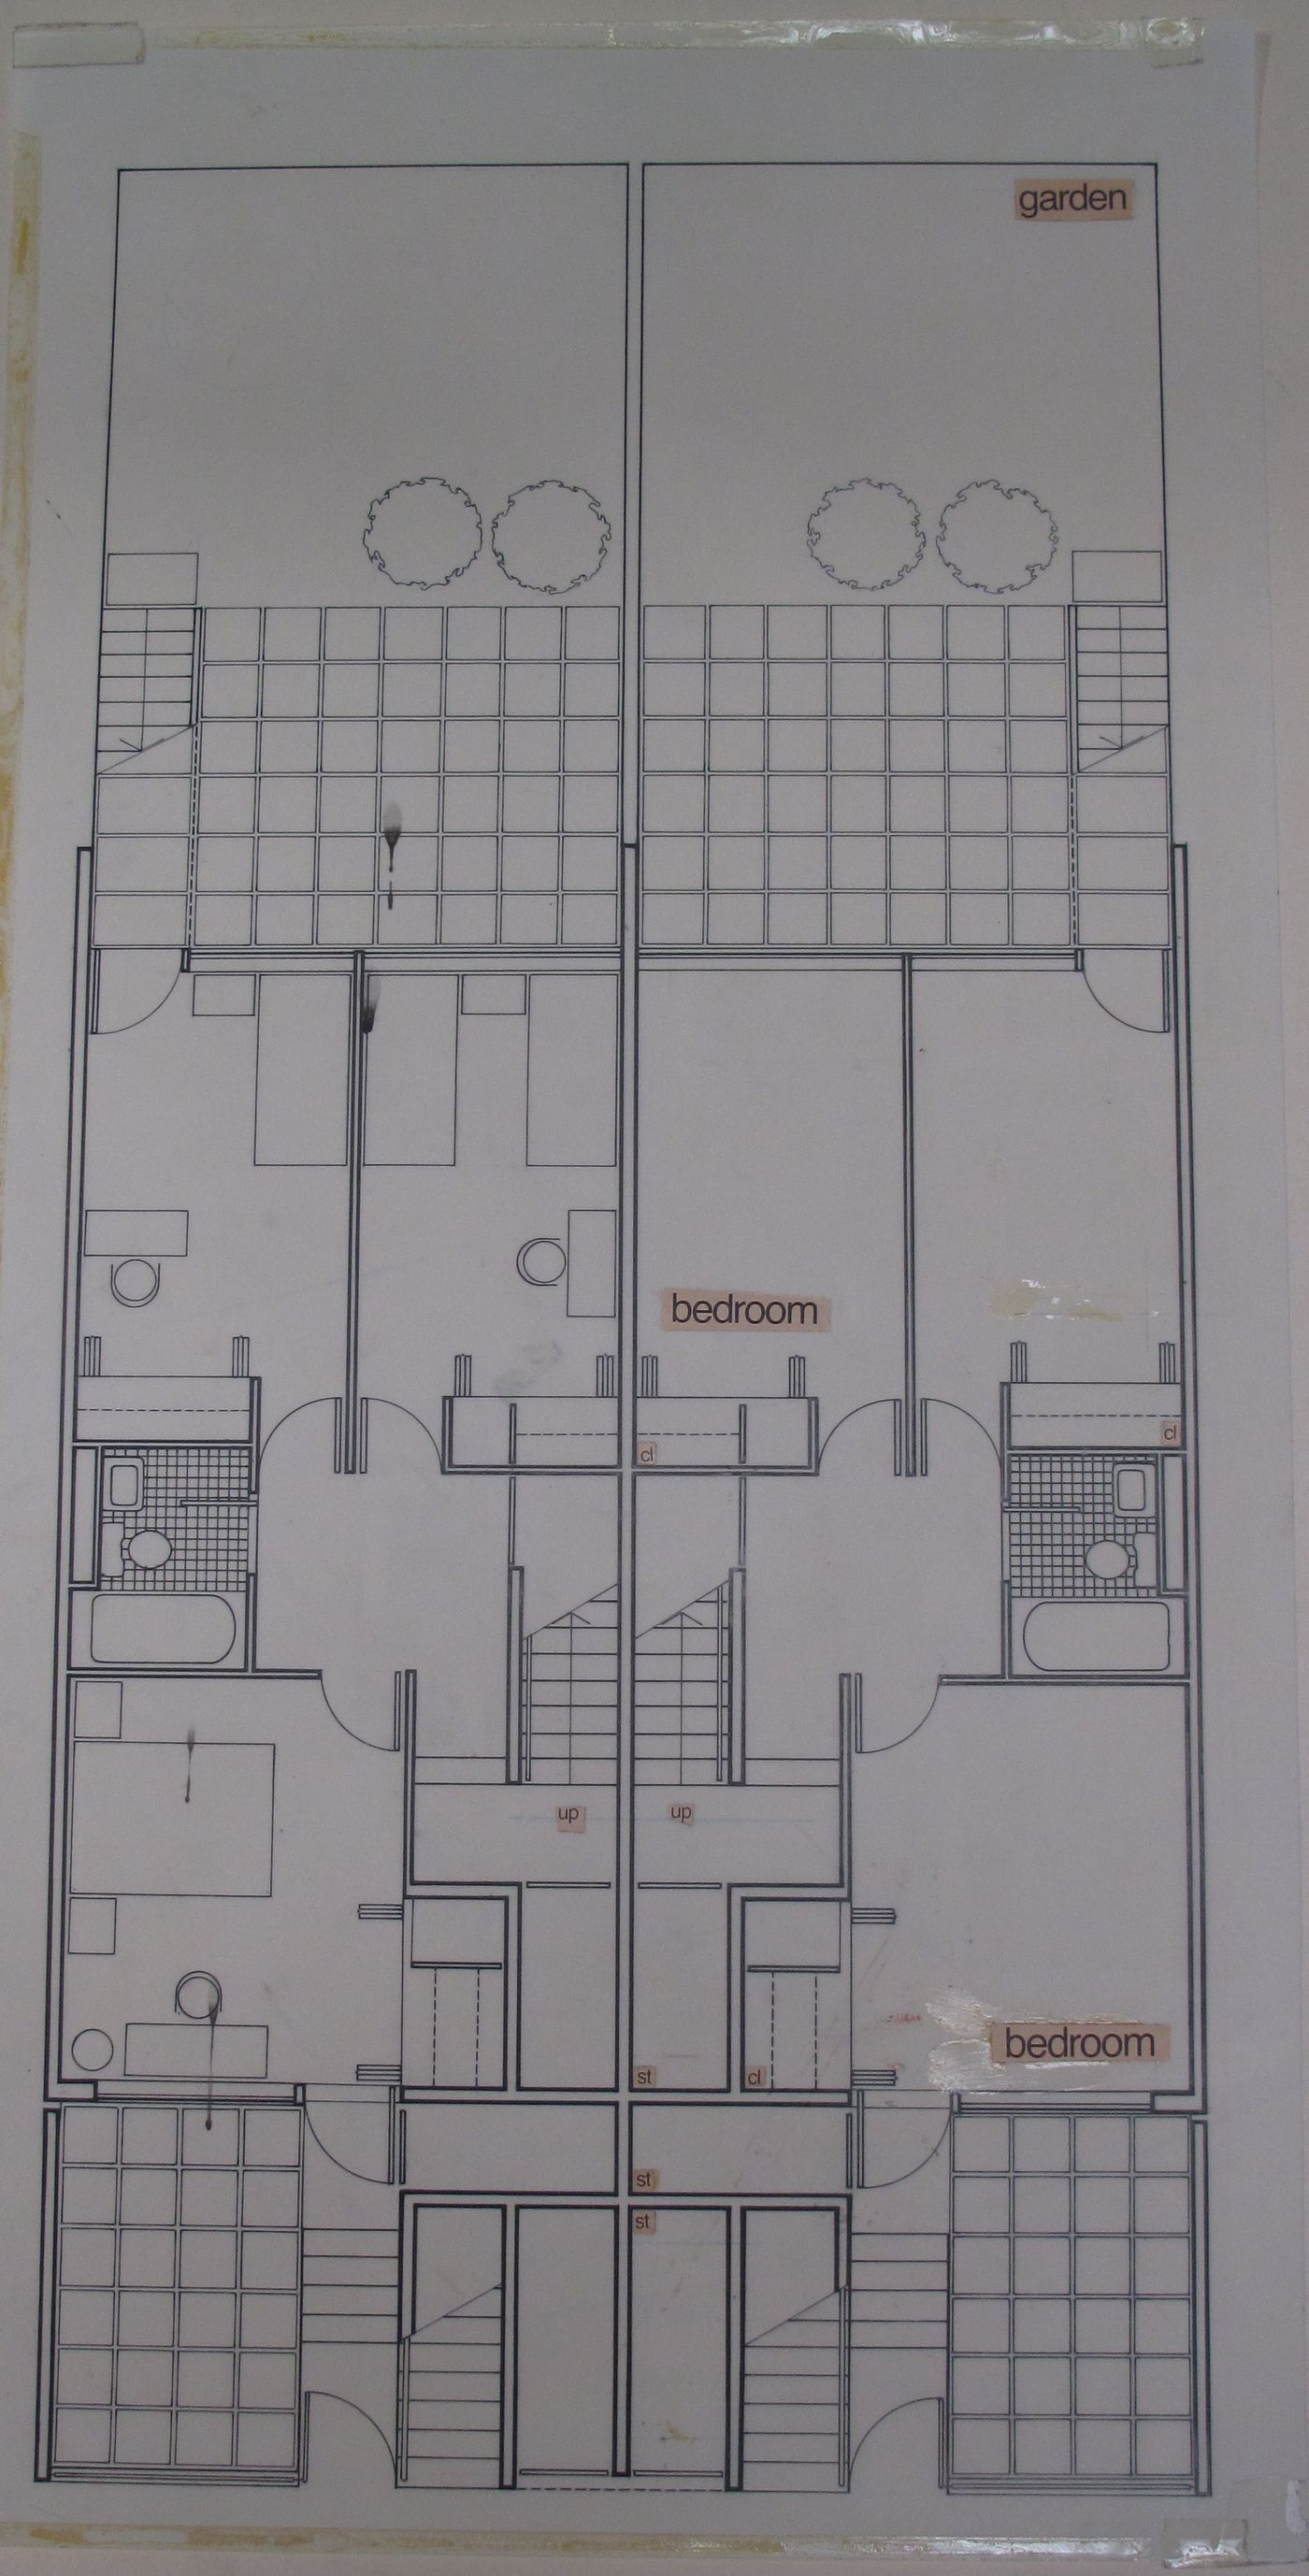 Plan of a two-bedroom unit on the ground floor of a Low-Rise High Density building at Brownsville